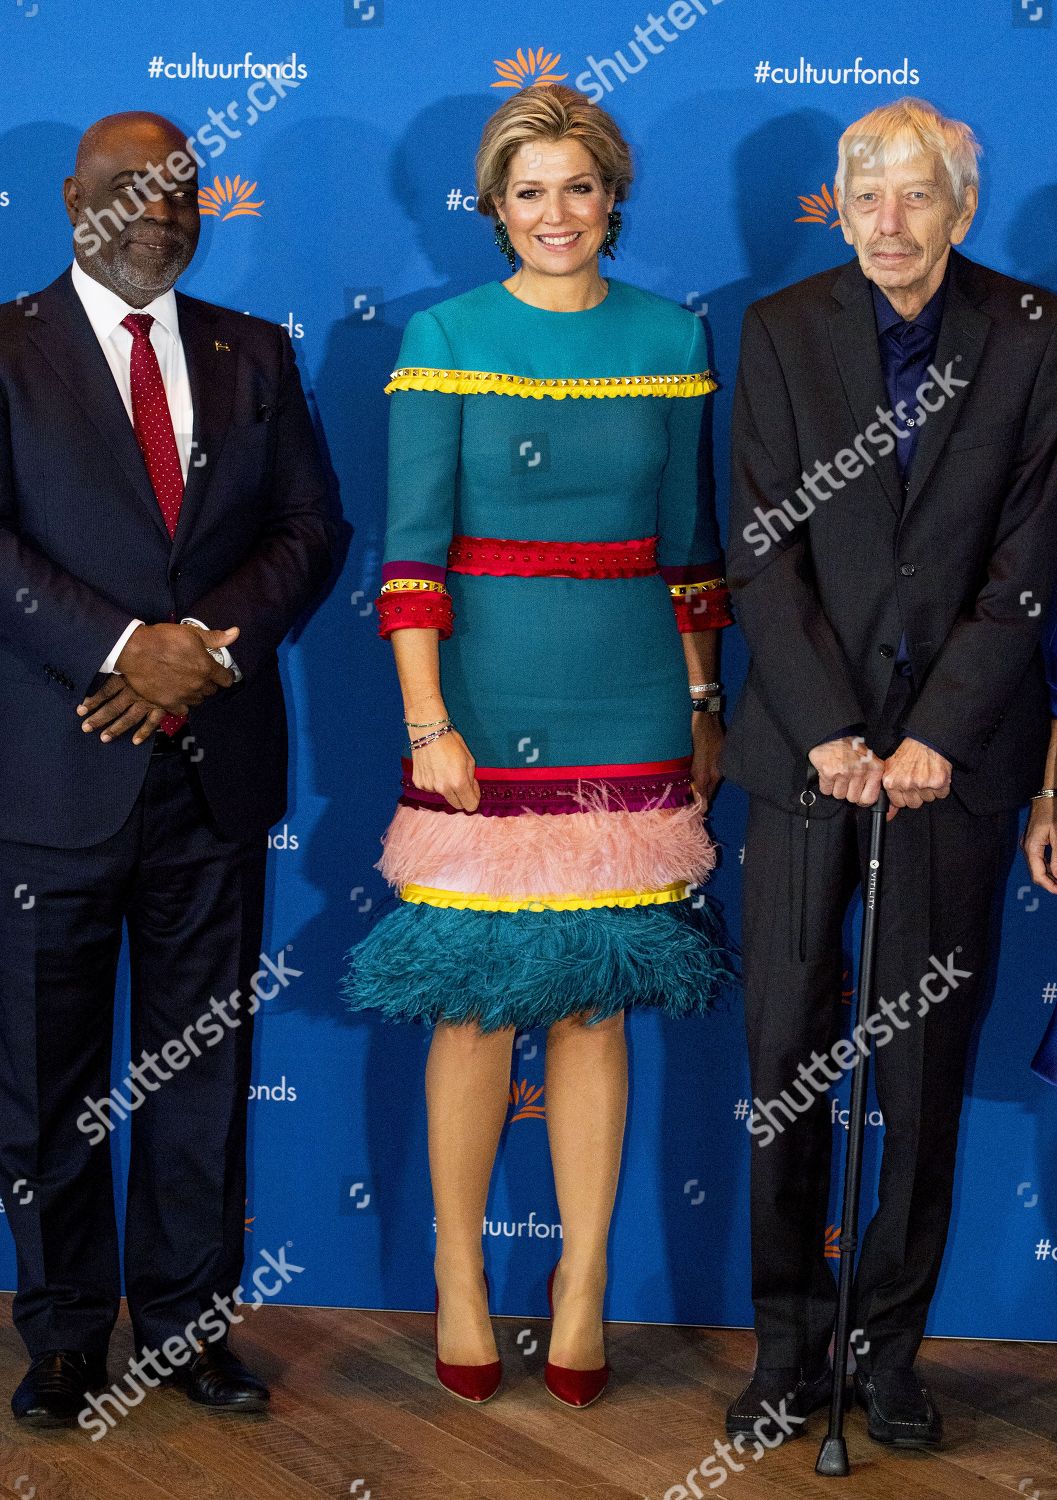 queen-maxima-presents-the-prince-bernhard-culture-fund-prize-2018-to-conductor-and-composer-reinbert-de-leeuw-amsterdam-the-netherlands-shutterstock-editorial-9993191b.jpg